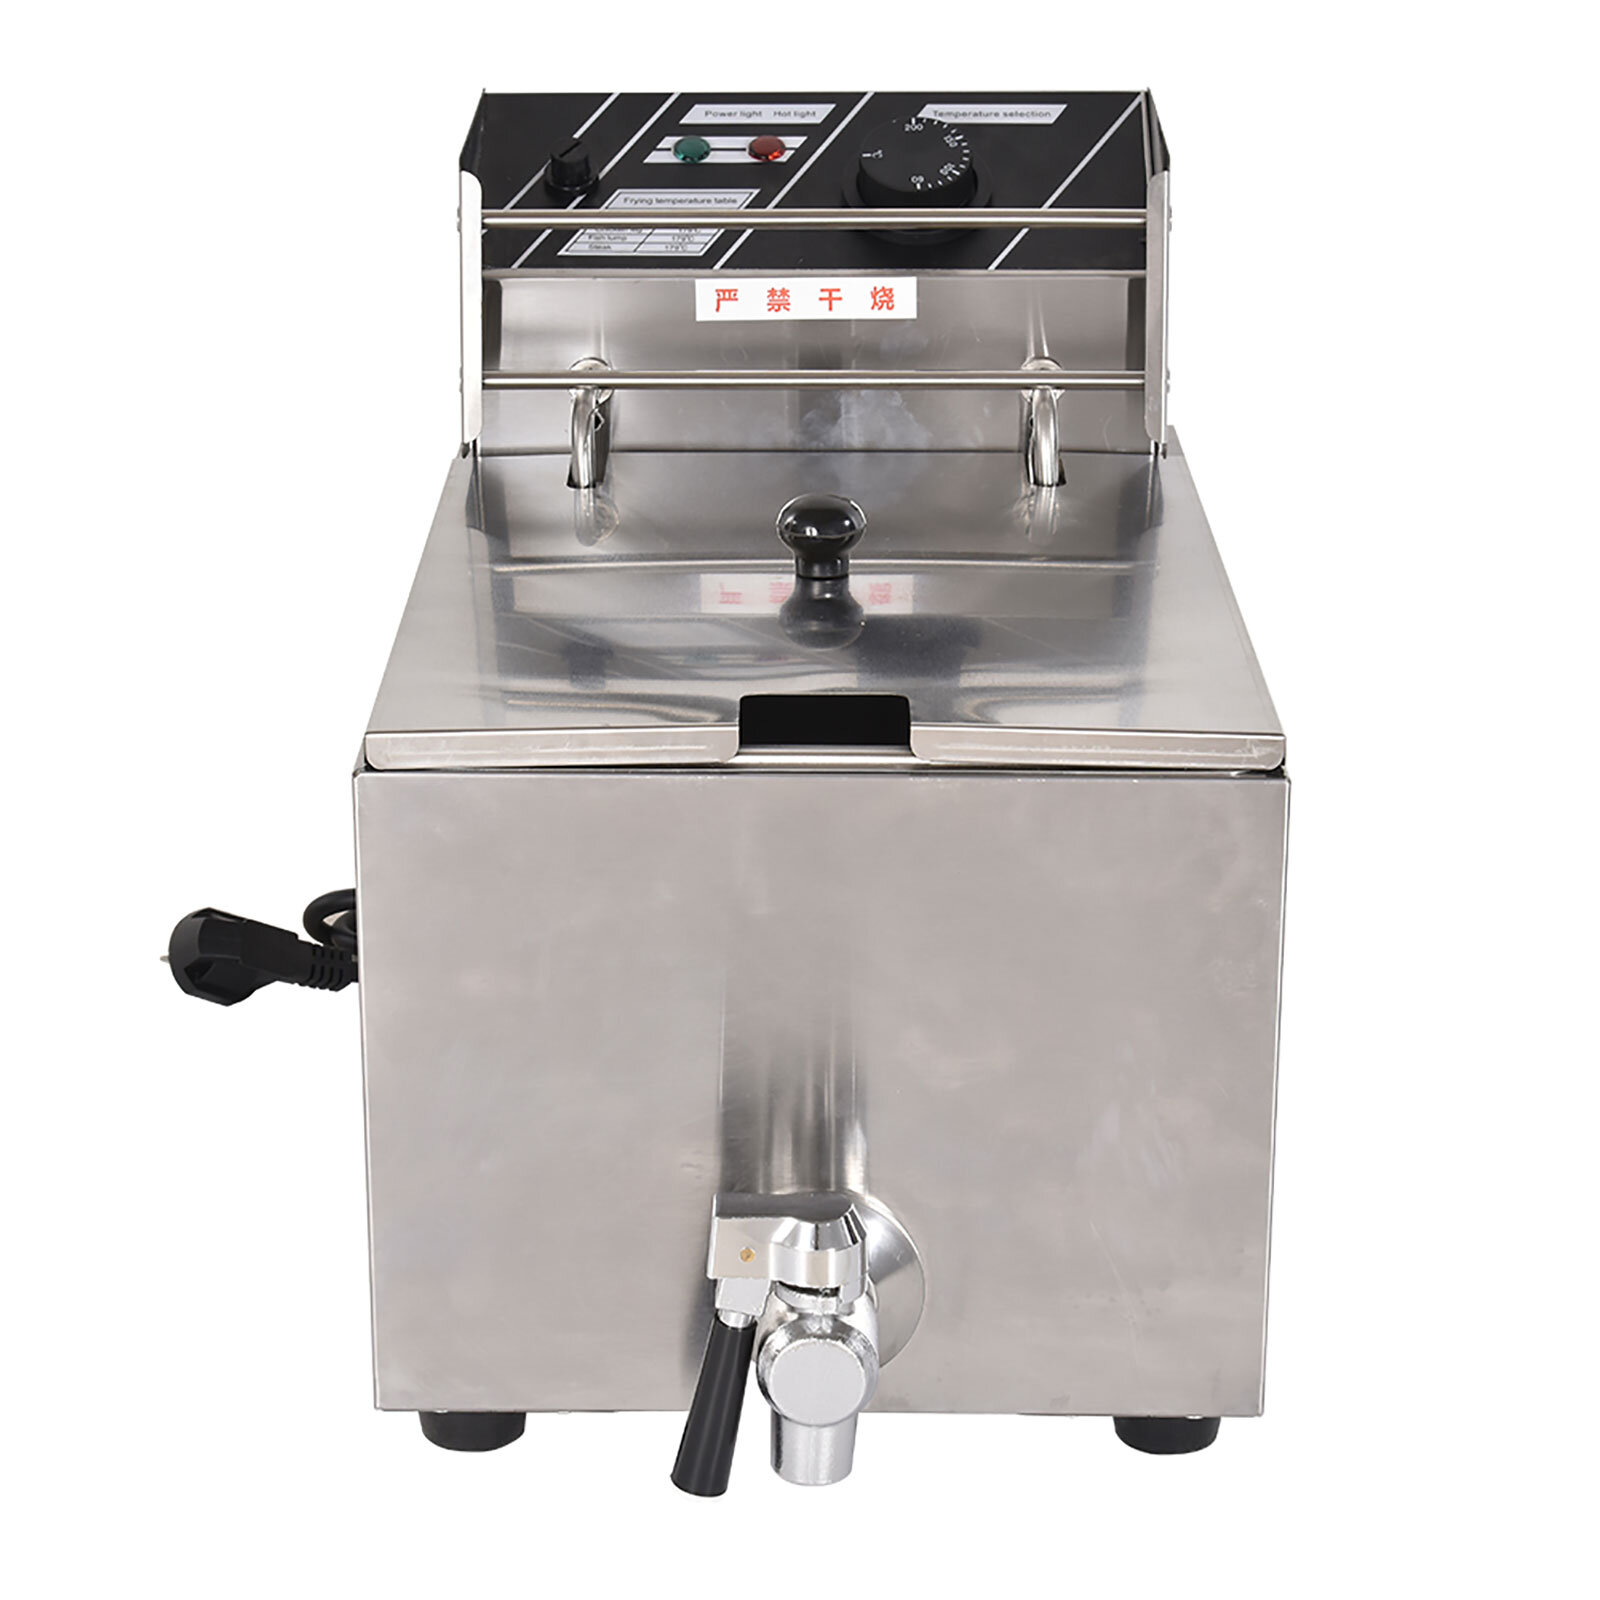 8.5QT/8L Stainless Steel Electric Deep Fryer with Basket and Temperature Lir for Restaurant Kitchen 1 Tank 1800W US shipment Commercial Deep Fryer 